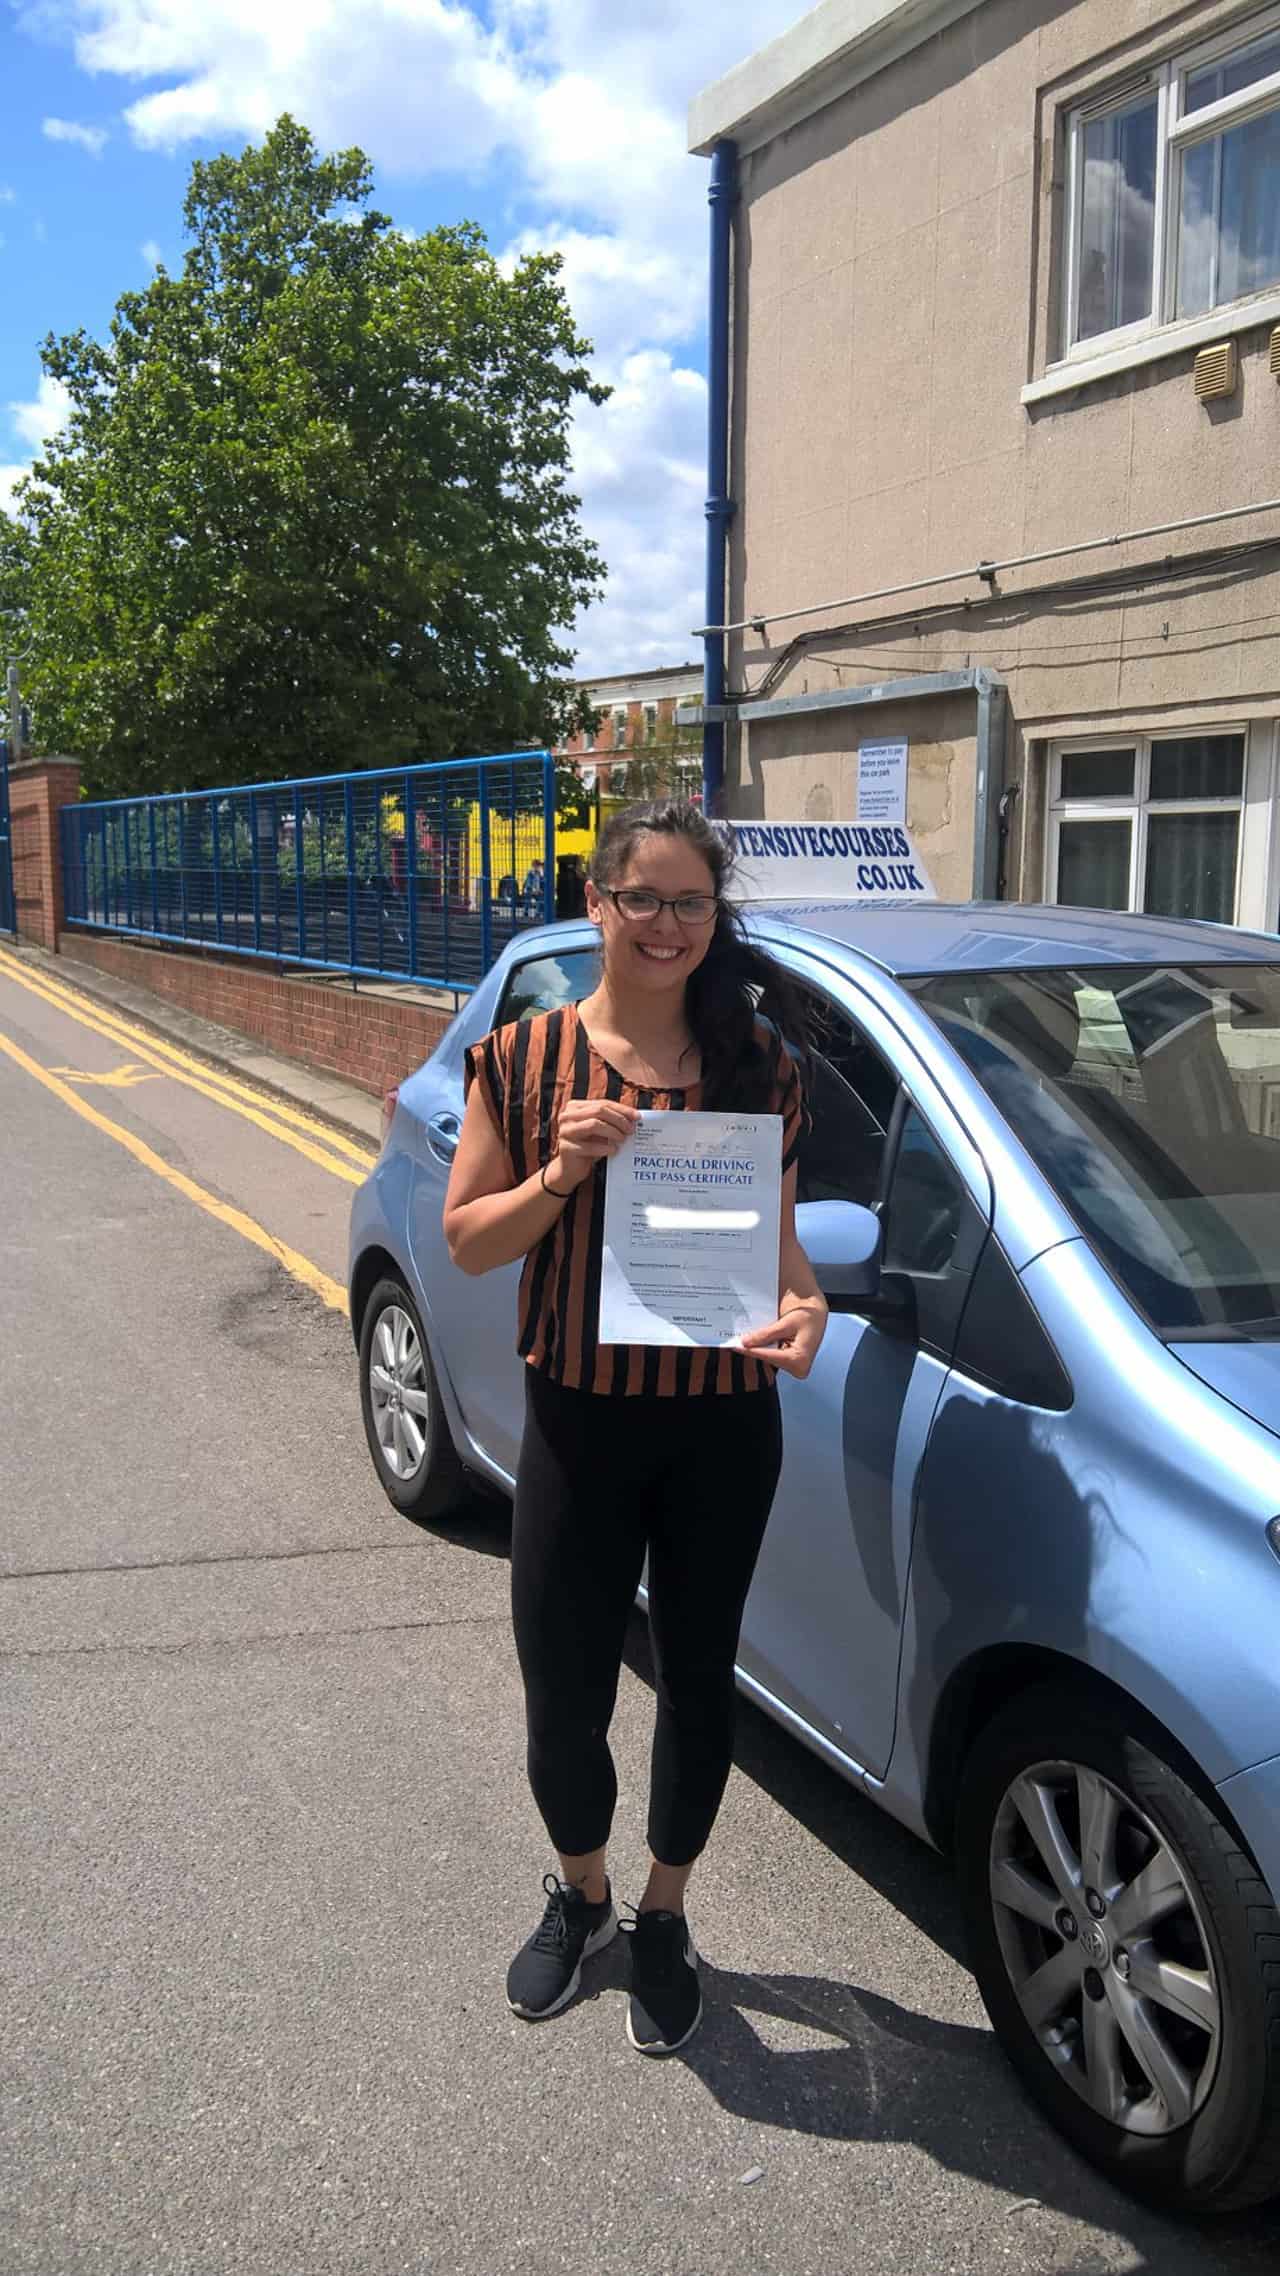 Congratulations to Lawri on passing your practical test with the help of George from Intensive Courses